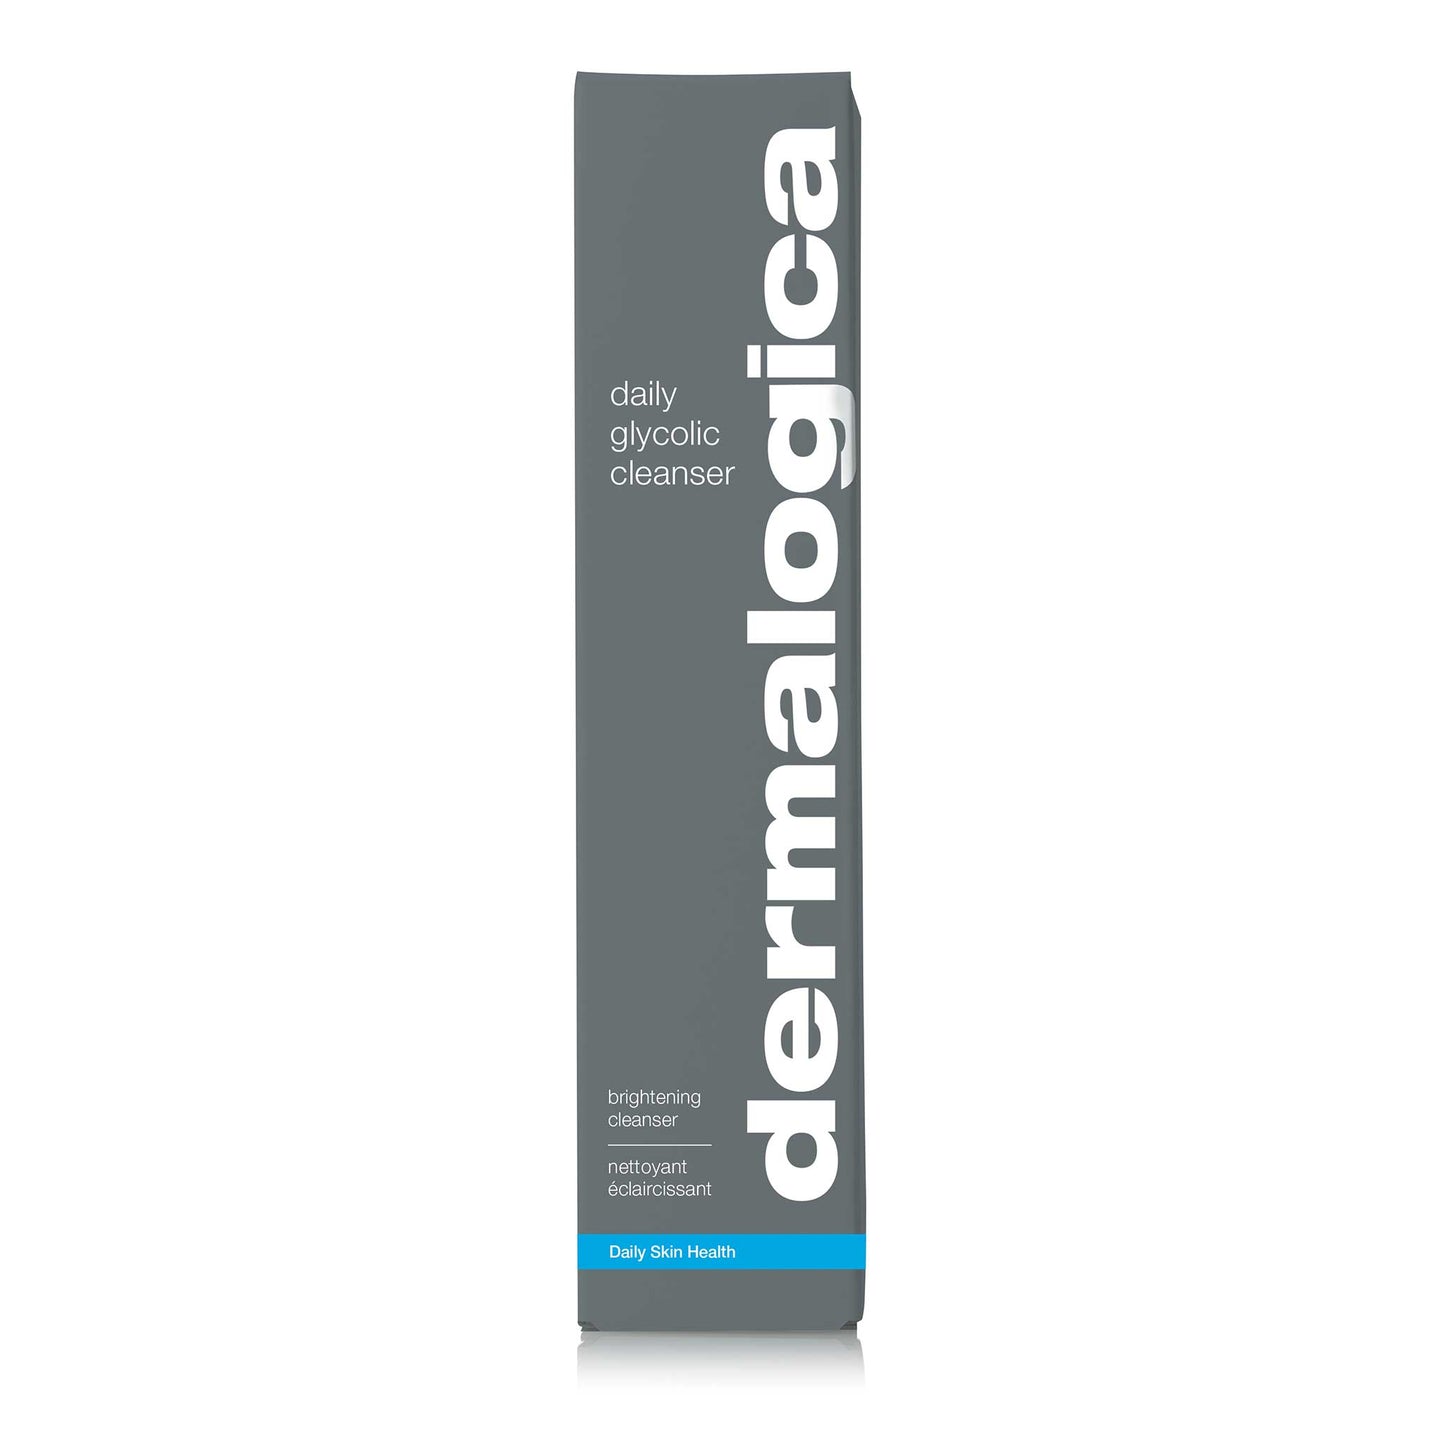 daily glycolic cleanser front of carton